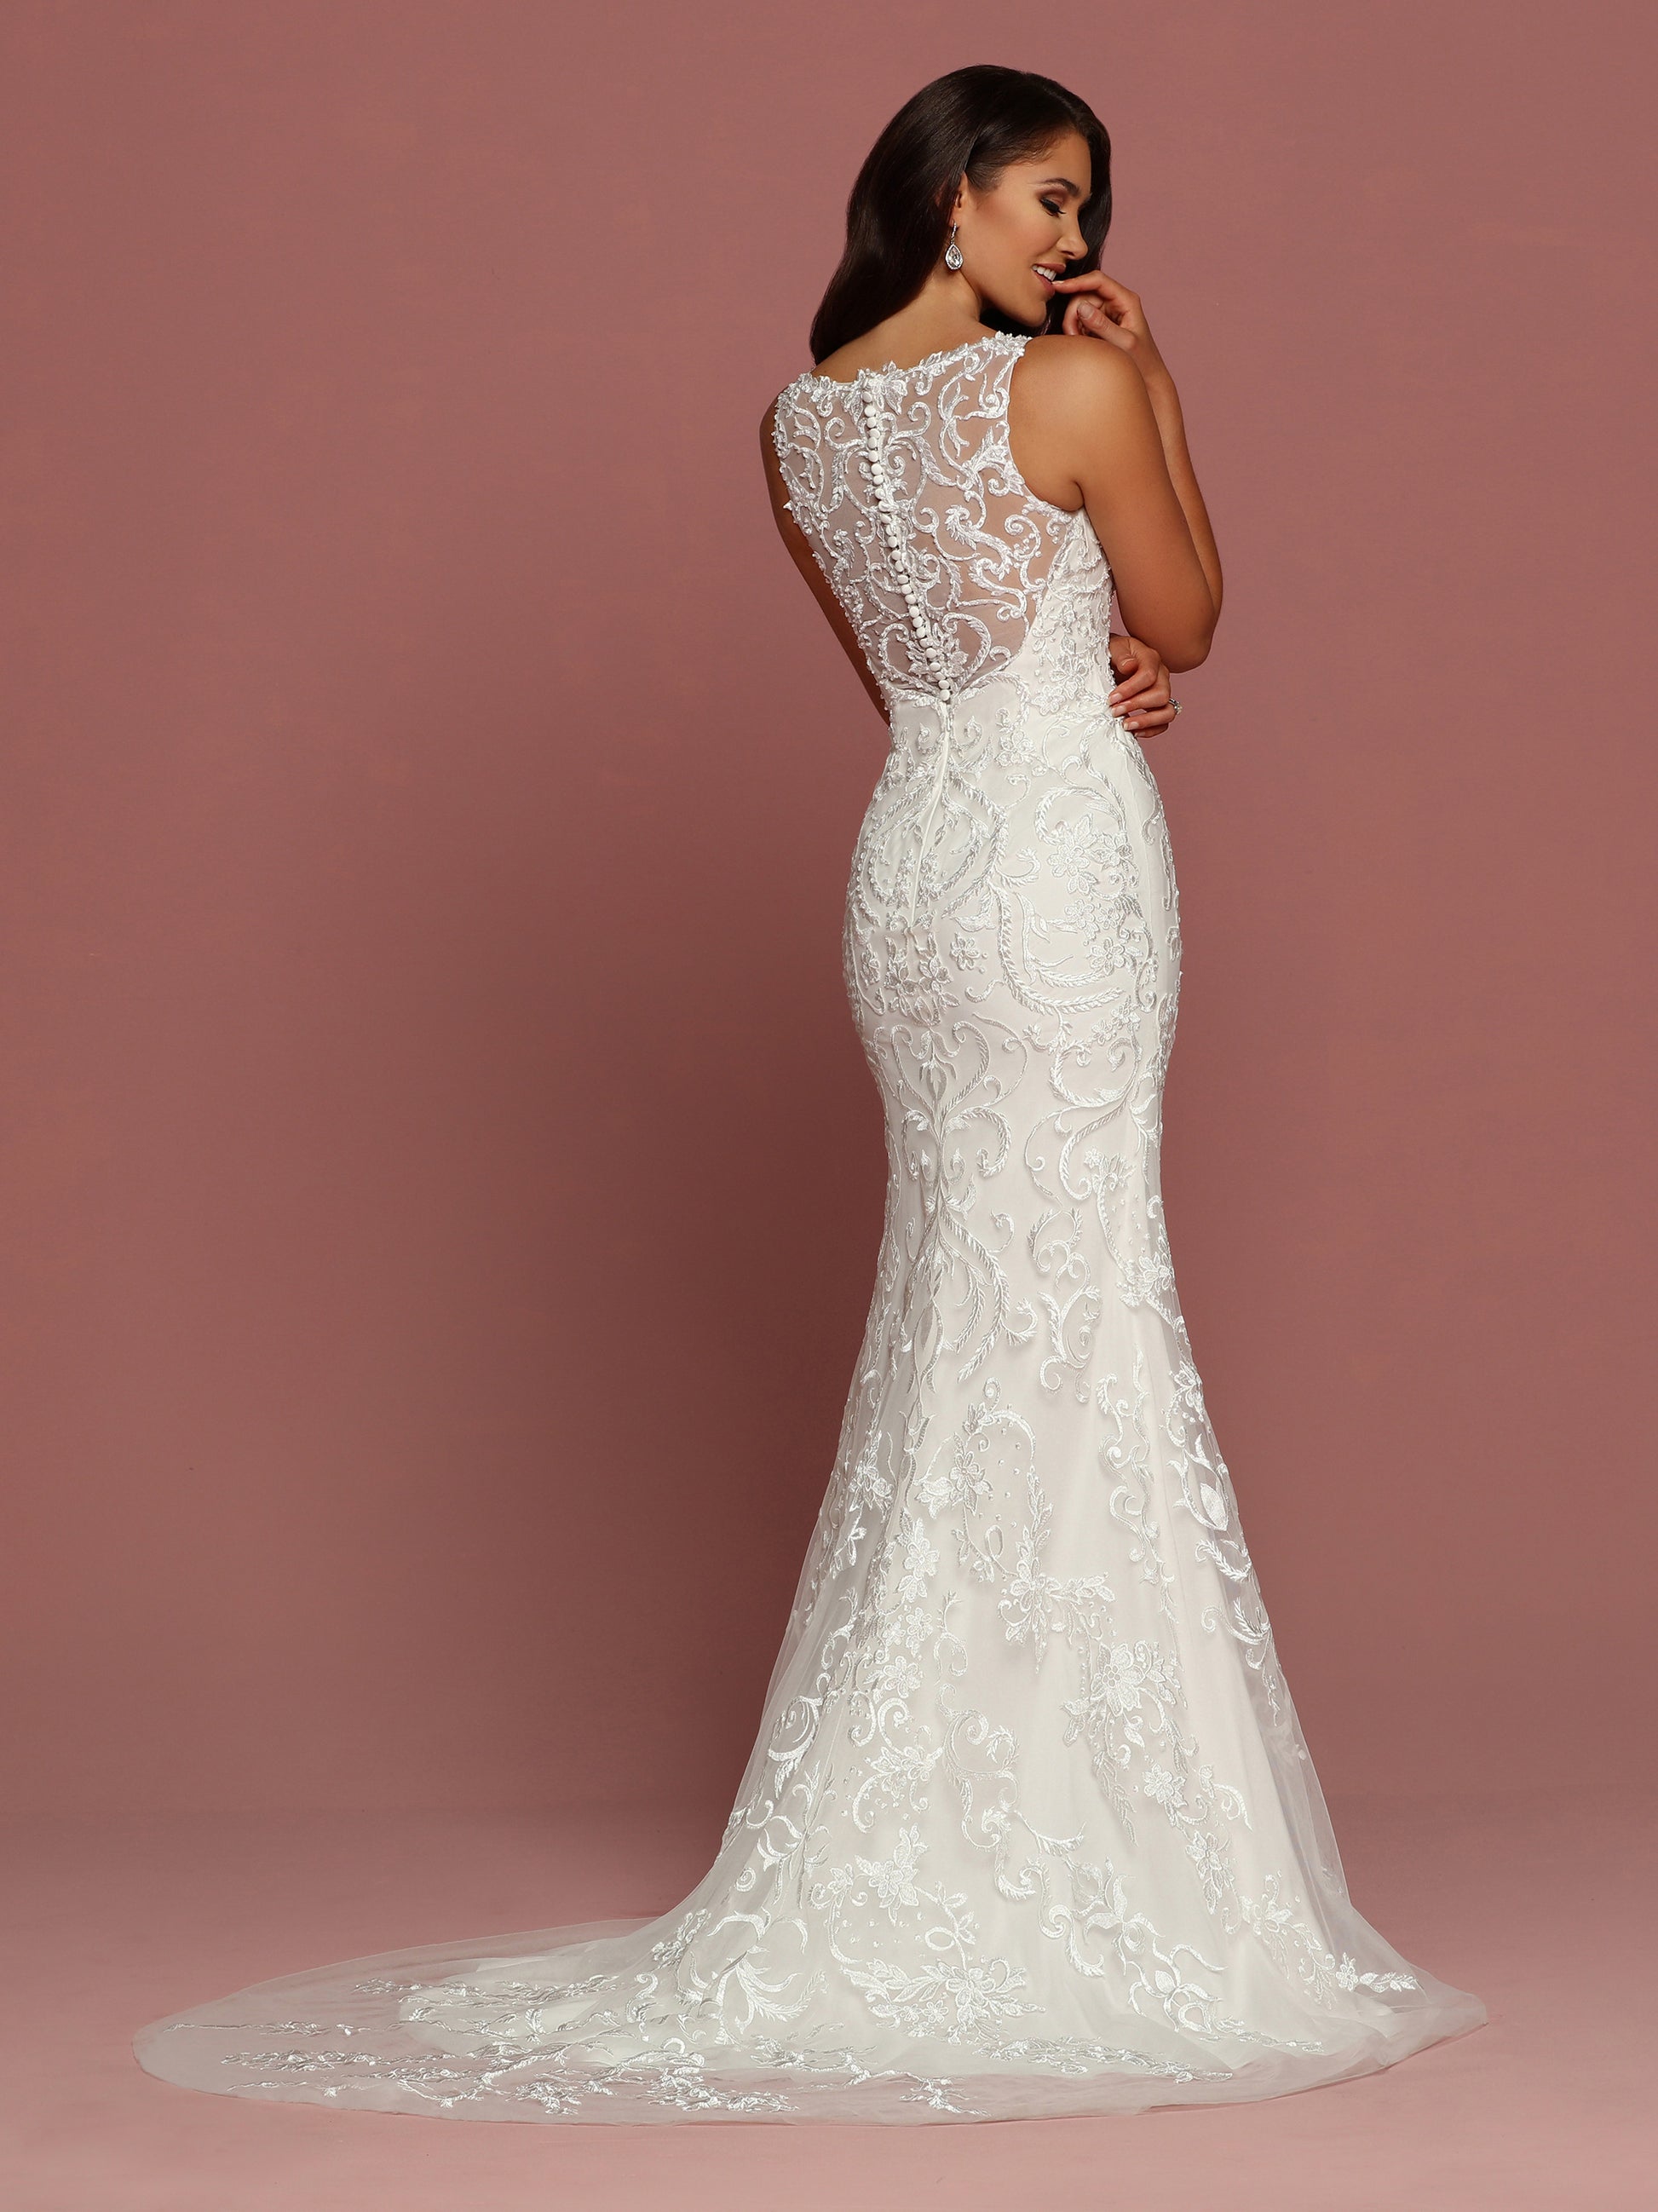 Davinci Bridal 50481 is a fitted mermaid silhouette wedding dress. Featuring a Sheer Lace Illusion high neckline and back with Button Seam. Embellished Embroidered Tulle. Small train flowing from trumpet skirt.  Available for 1-2 Week Delivery!!!  Available Sizes: 2,4,6,8,10,12,14,16,18,20  Available Colors: Ivory  Available Colors: Ivory, Whi